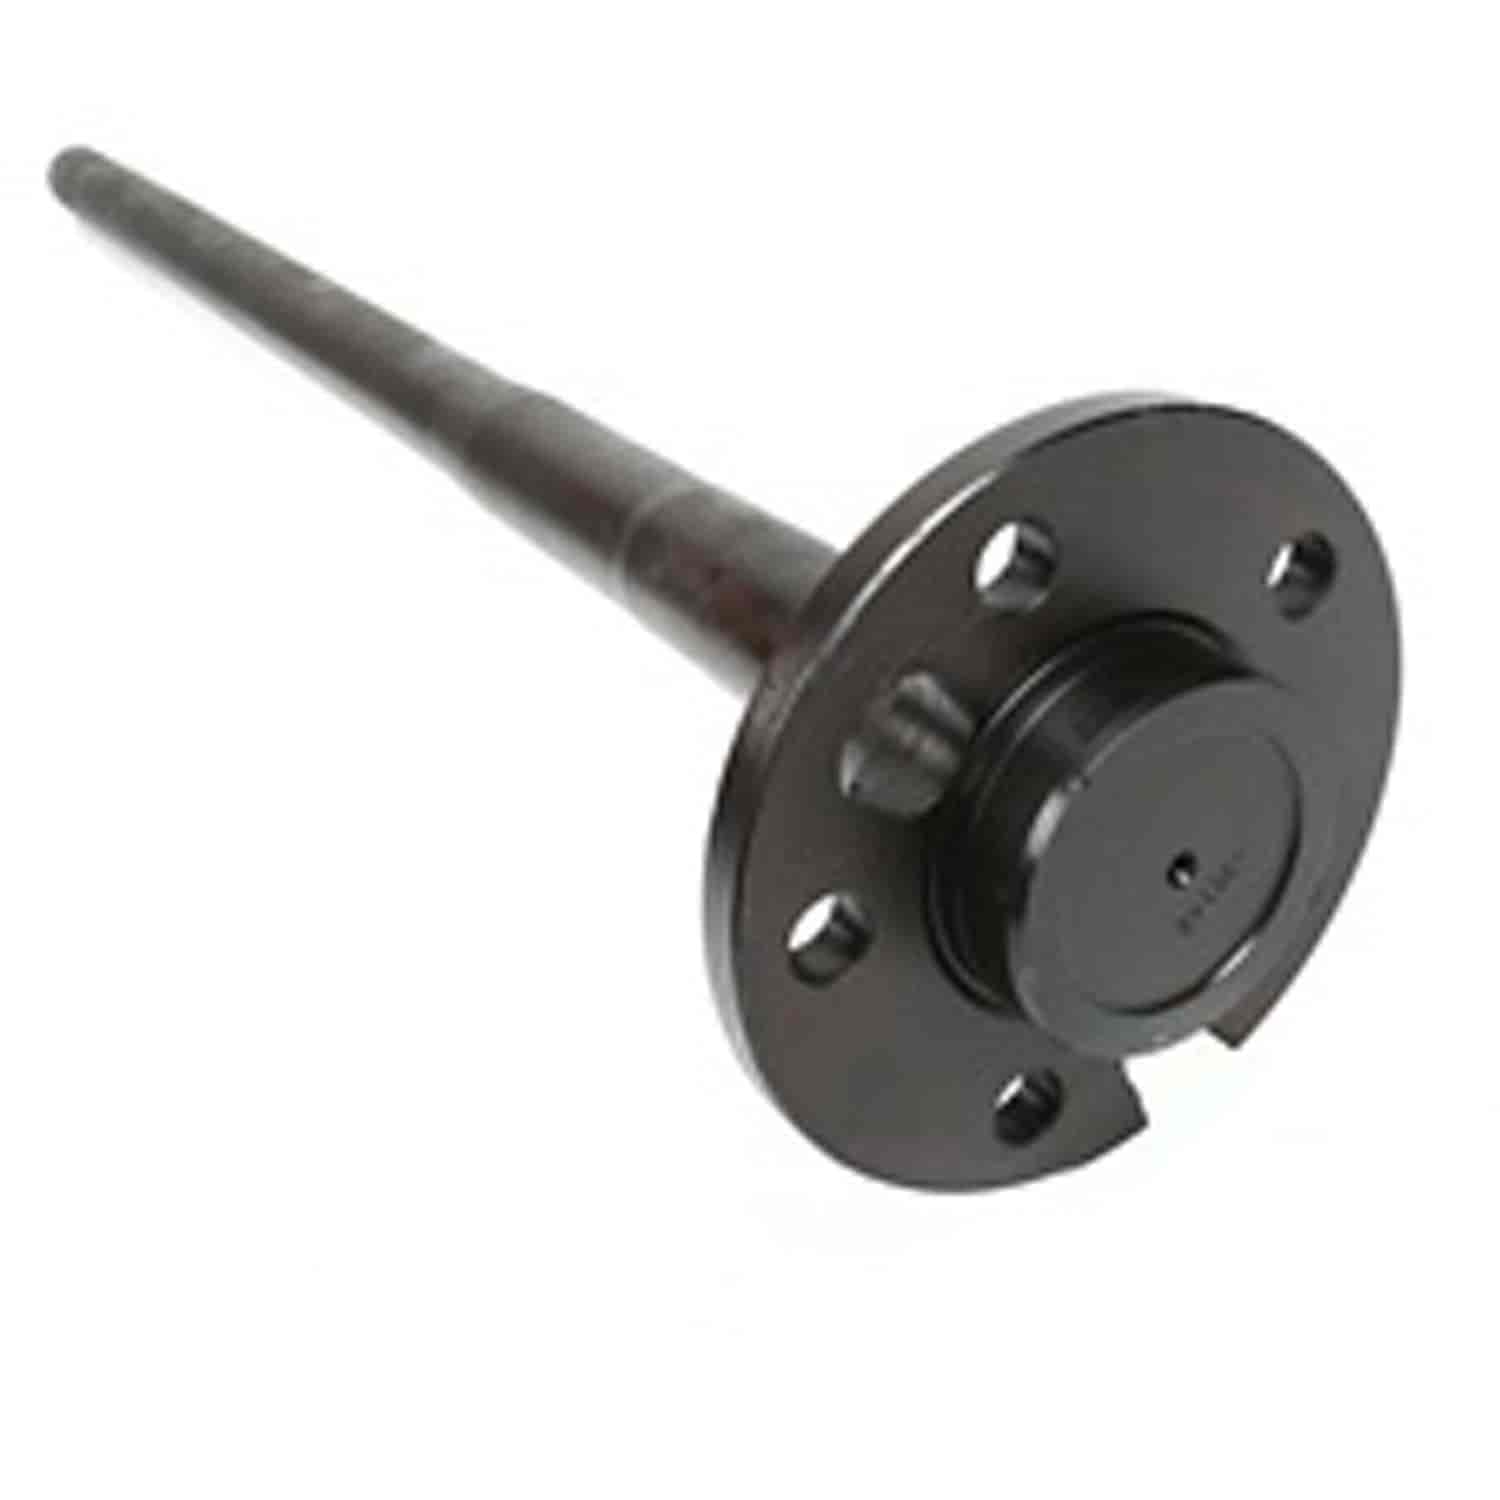 This rear axle shaft for Dana 44 from Omix-ADA fits the left side of 03-06 Jeep Wrangler TJ with ABS and rear drum brakes.